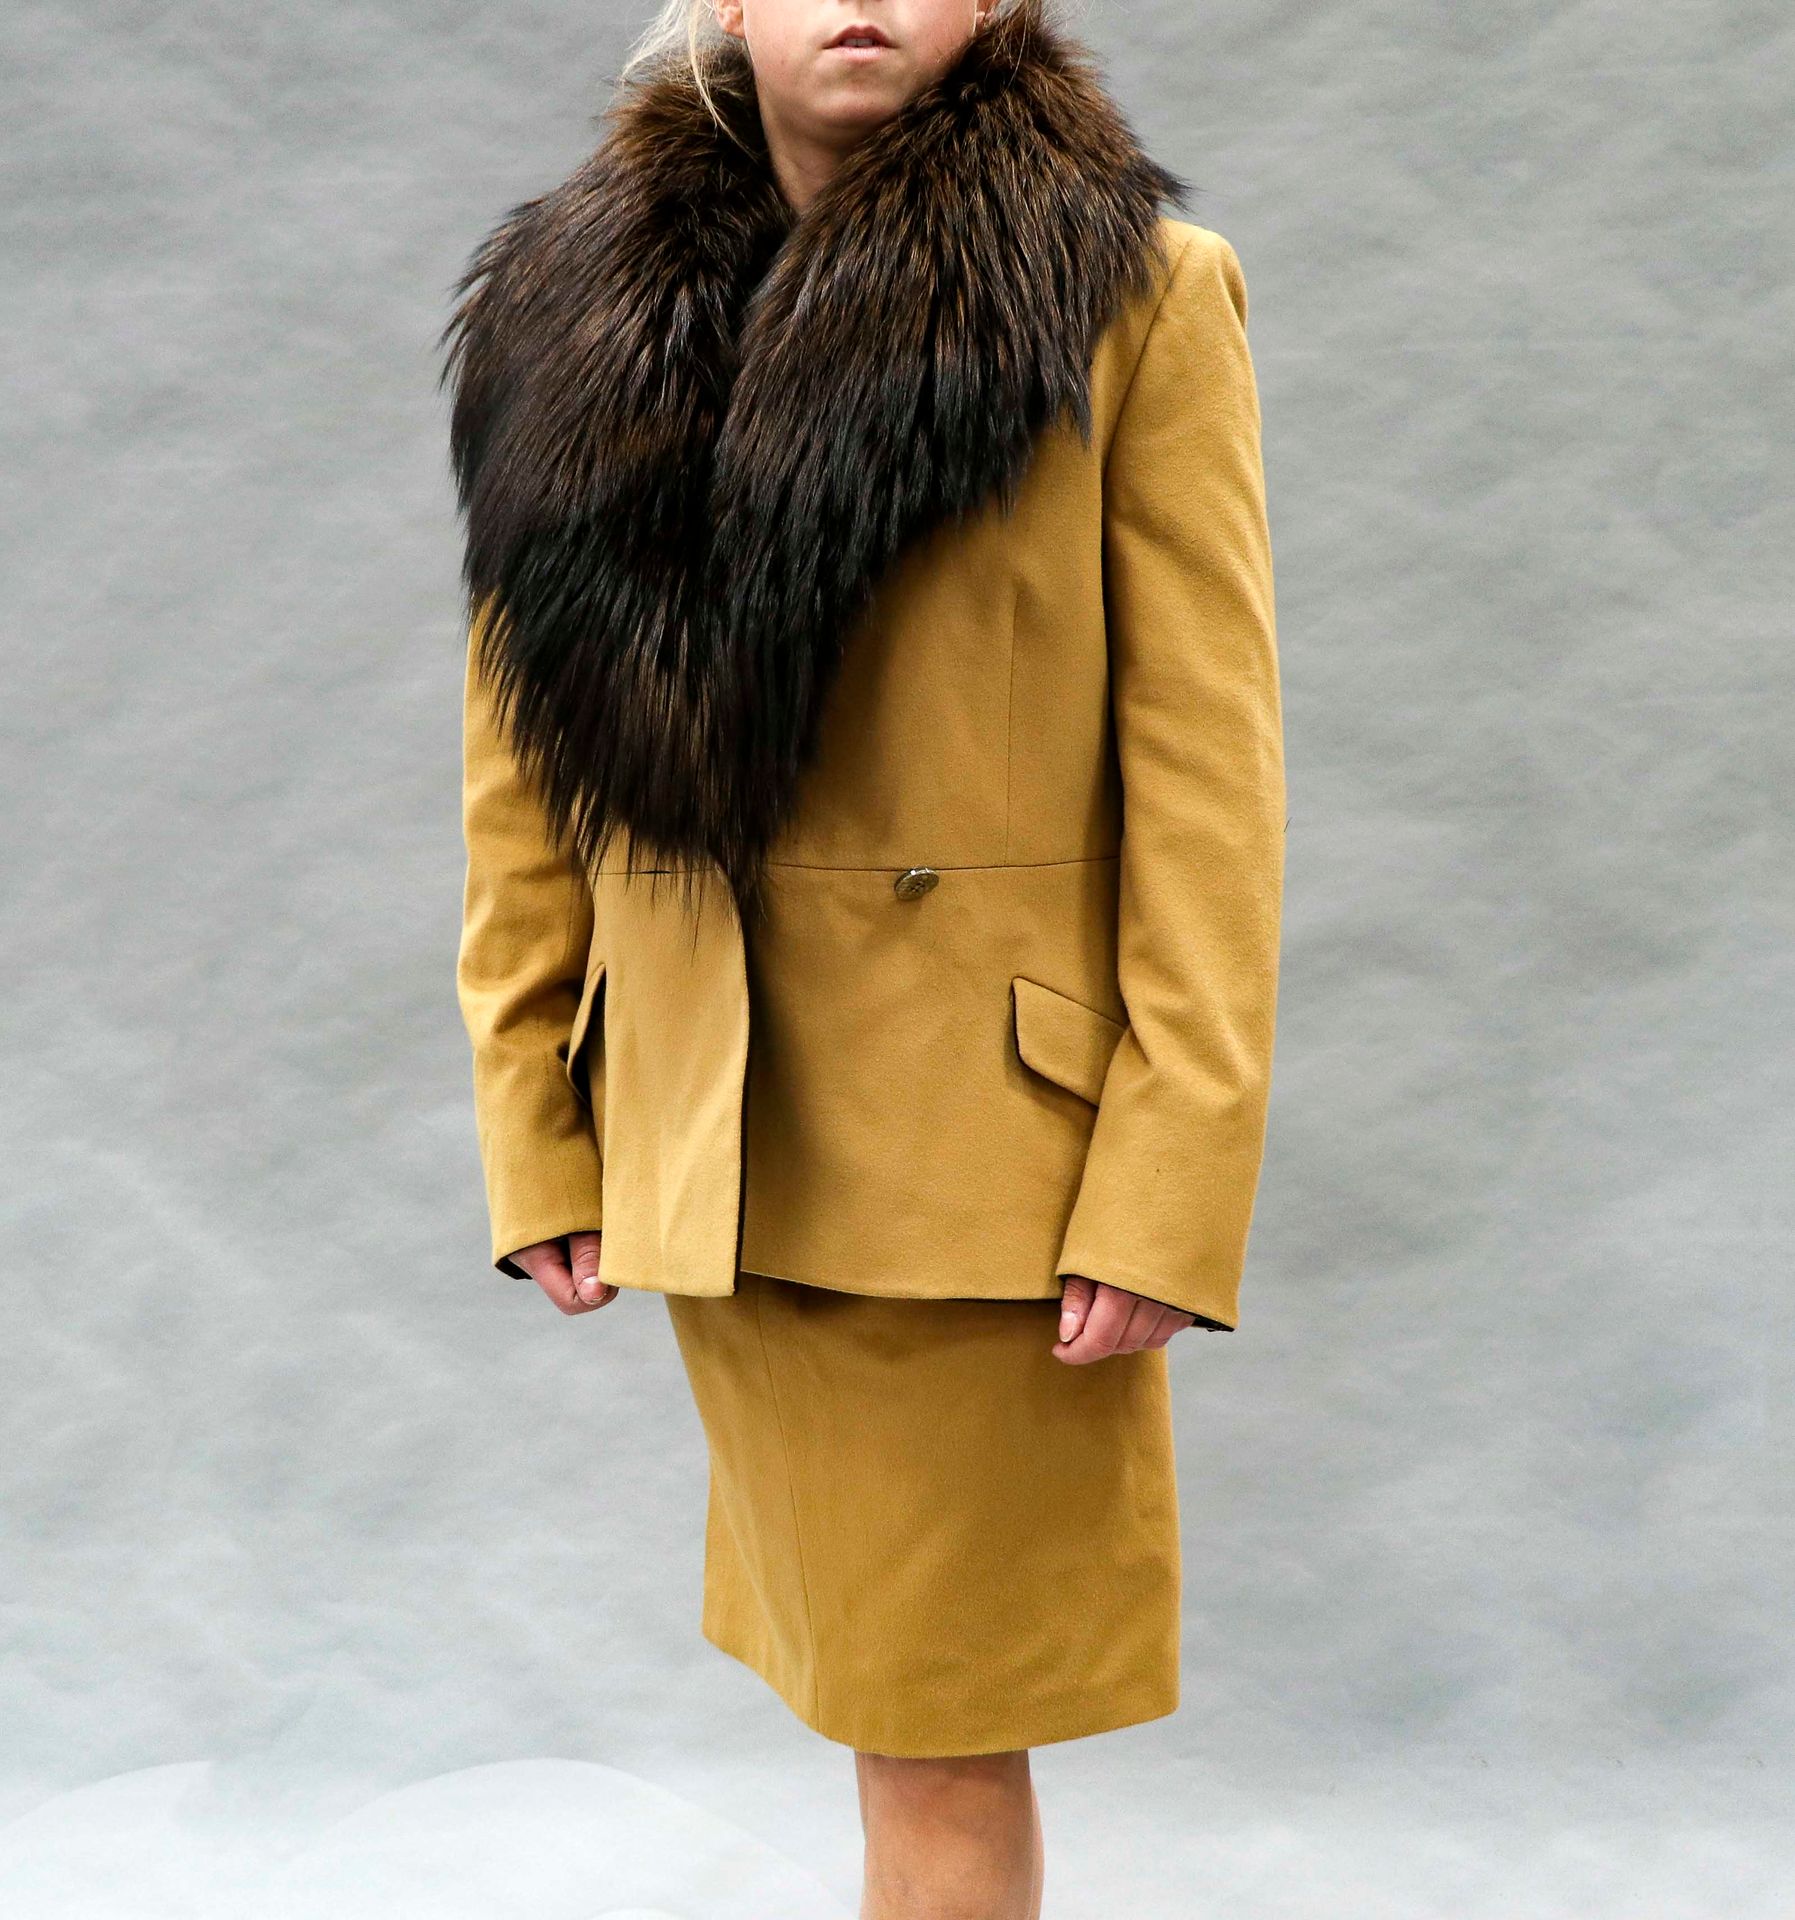 Null DOLCE GABBANA. Camel wool and fur skirt suit. S 38/40 (marked 46 Italian)